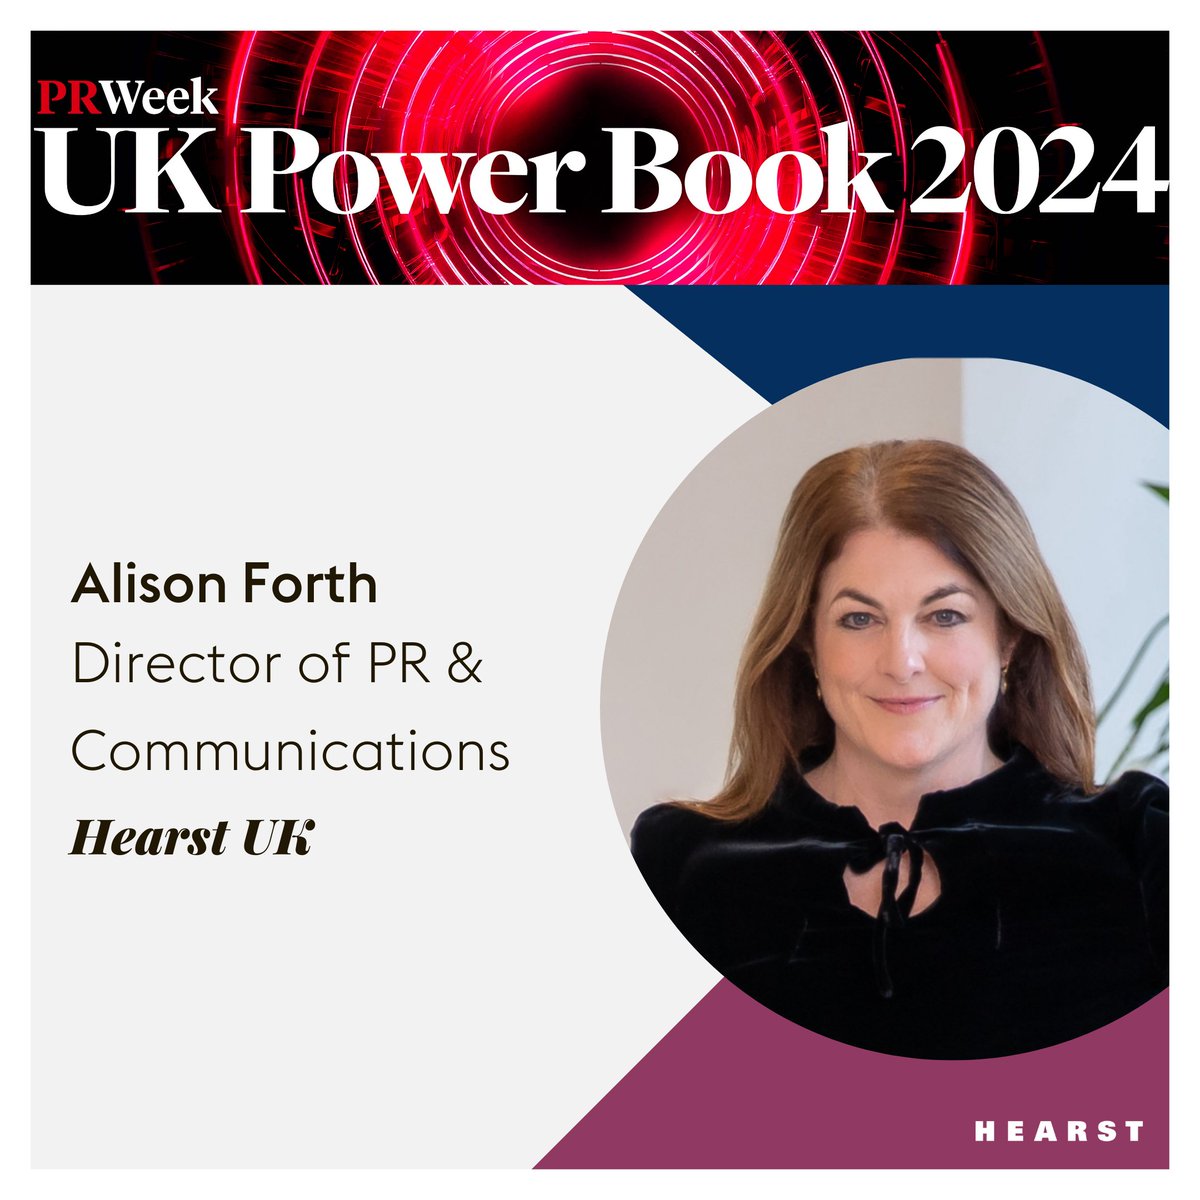 Congratulations to Alison Forth, Director of PR & Communications, who has been named in @prweekuknews's 2024 Power Book, the definitive guide to the most respected PR professionals in the UK. bit.ly/3wQOCzC 👏 #hearstuk #prweekpowerbook #prweek